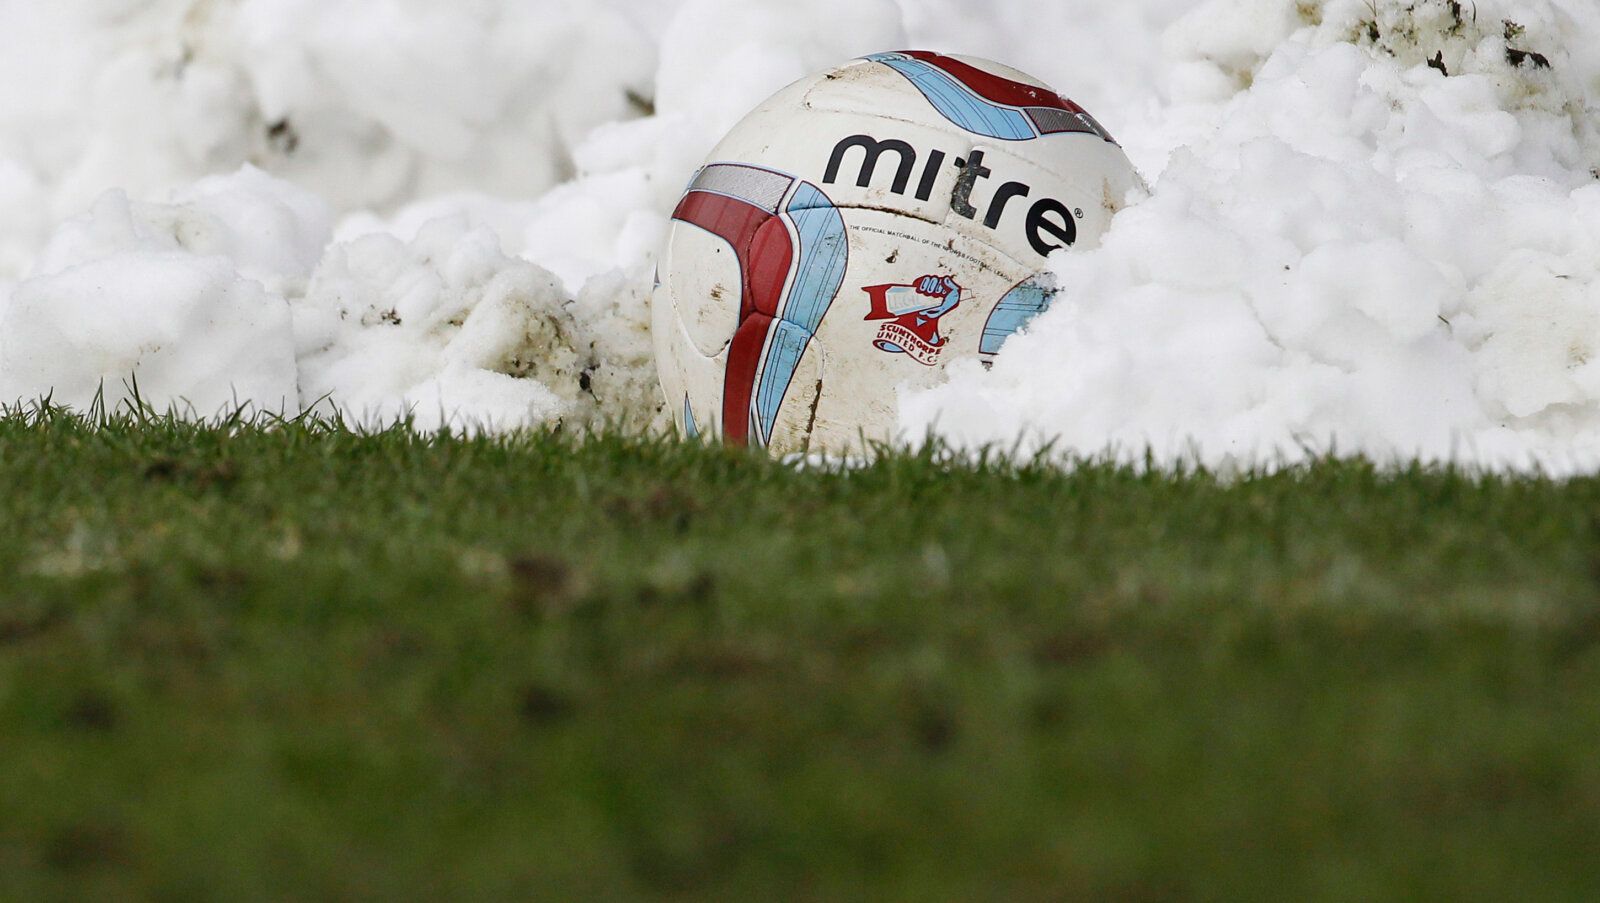 Football - Scunthorpe United v Doncaster Rovers - npower Football League One - Glanford Park - 23/3/13 
General view of the Mitre match ball buried in snow 
Mandatory Credit: Action Images / Craig Brough 
Livepic 
EDITORIAL USE ONLY. No use with unauthorized audio, video, data, fixture lists, club/league logos or live services. Online in-match use limited to 45 images, no video emulation. No use in betting, games or single club/league/player publications.  Please contact your account representat